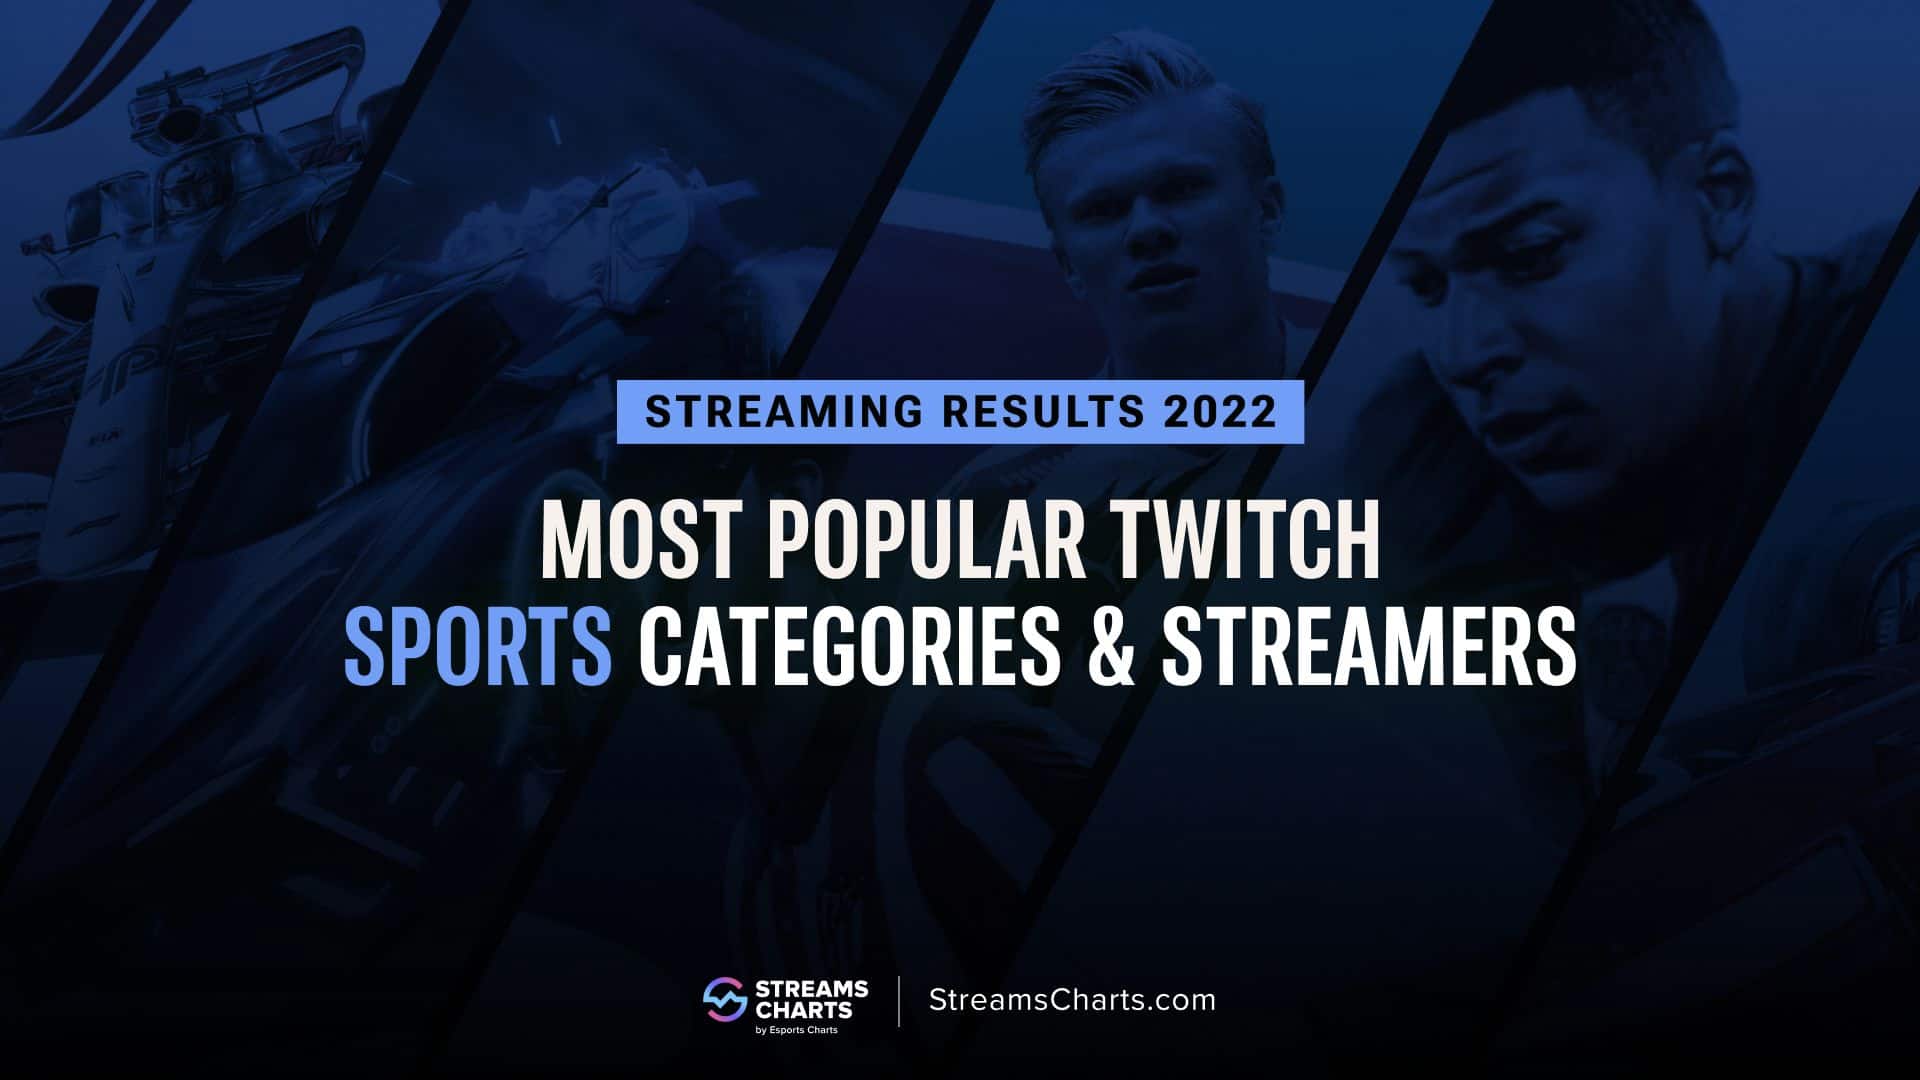 Most-watched sports Twitch streams include Trackmania, iRacing in 2022 Traxion